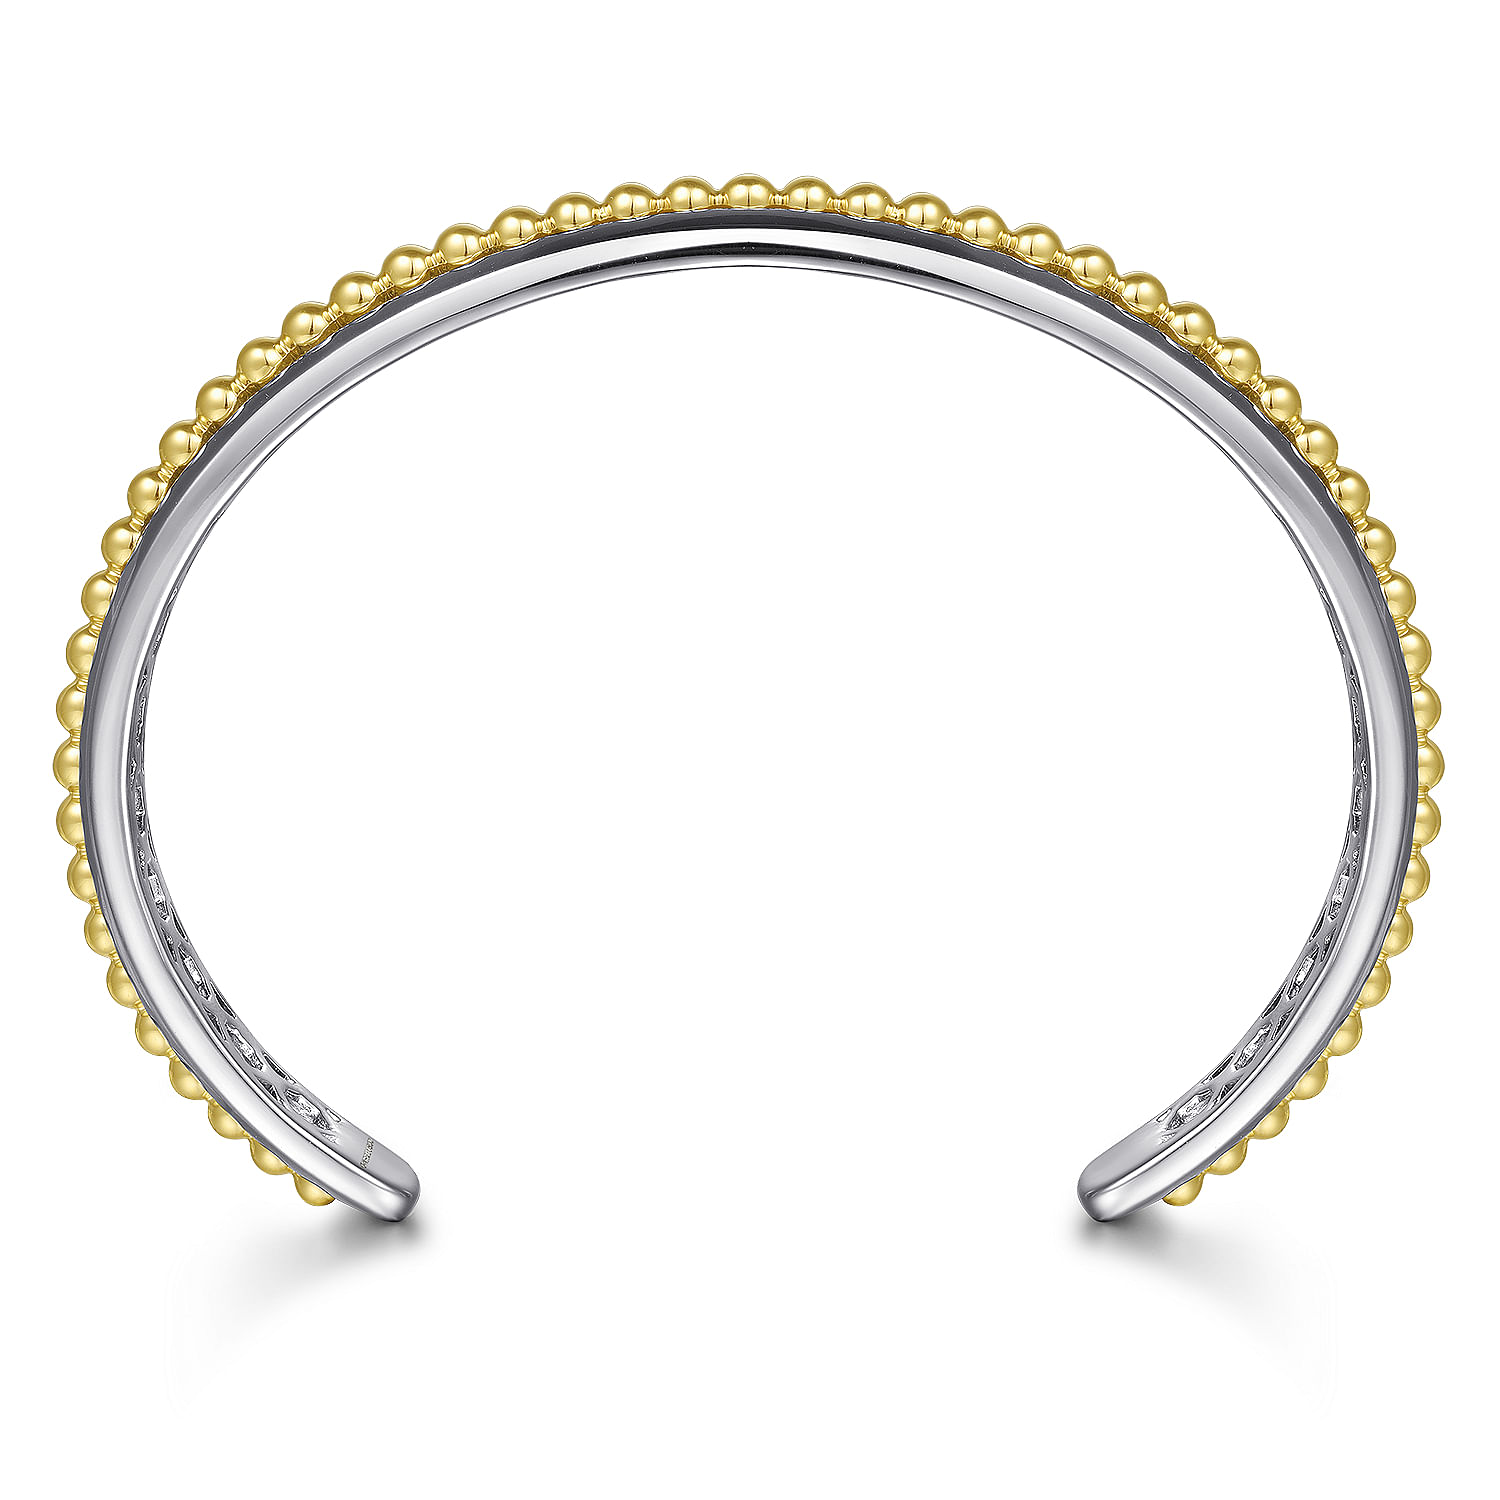 Sterling Silver Open Cuff Bracelet with 14K Yellow Gold Beads - Shot 3